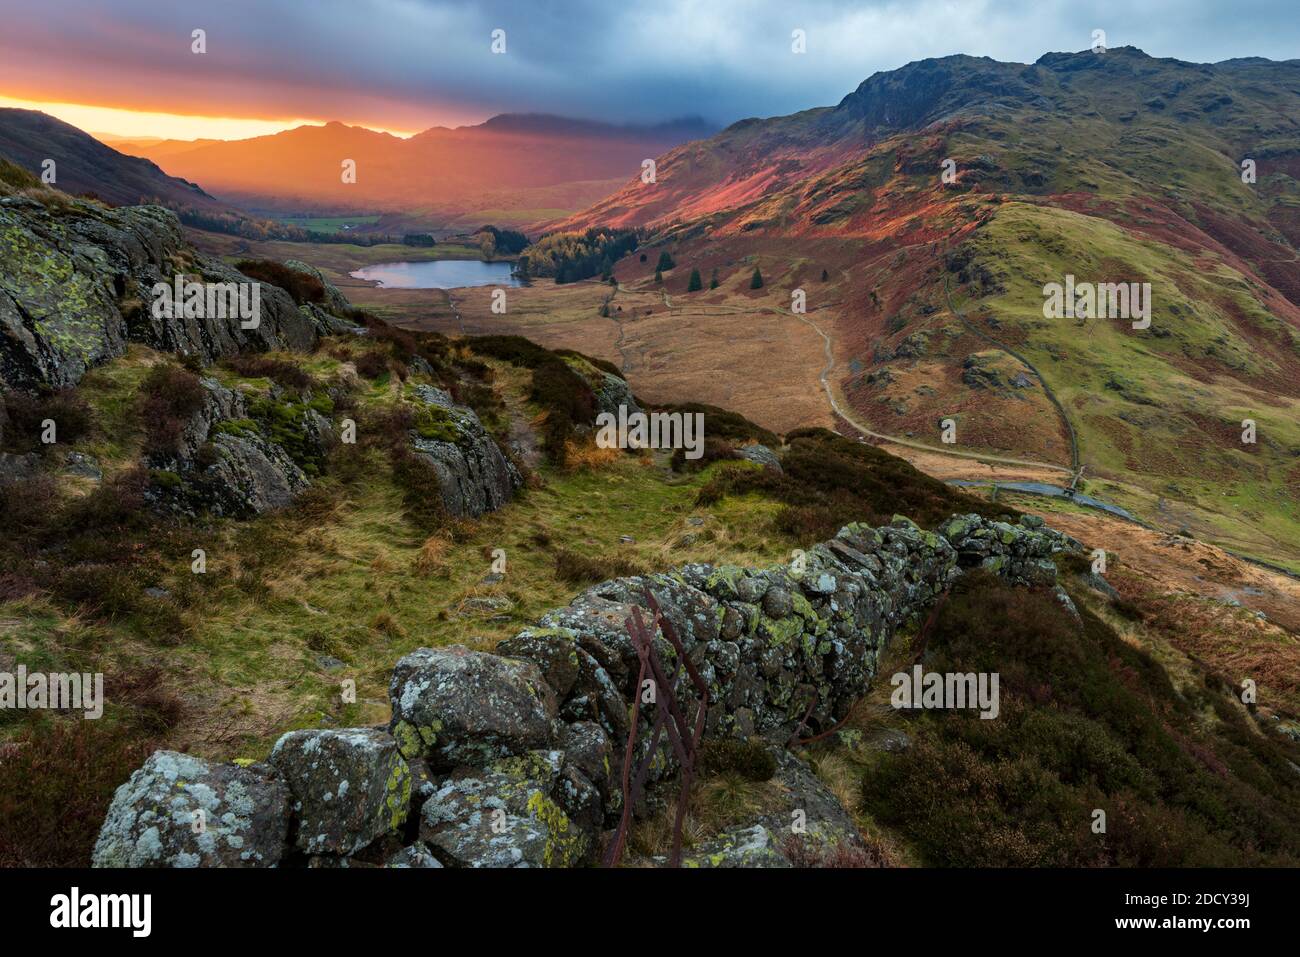 Beautiful Glowing Sunrise With Rural Stone Wall High Up In The Lake District Fells. Stock Photo